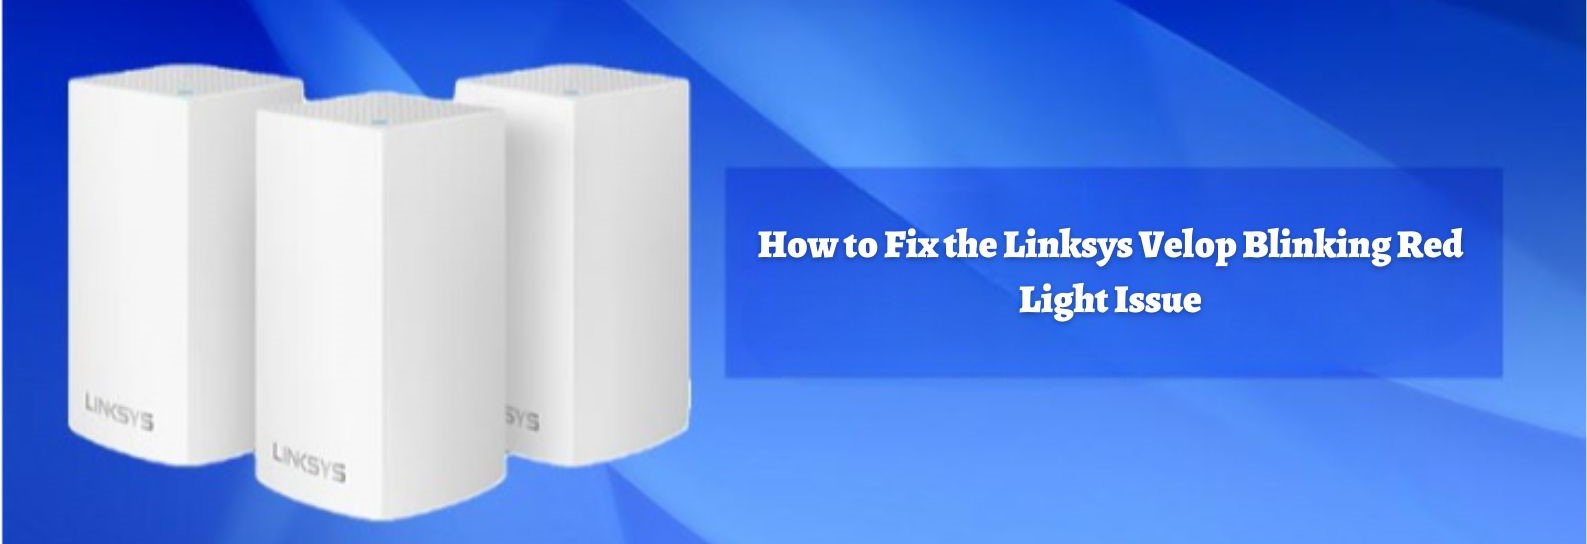 How to Fix the Linksys Velop Blinking Red Light Issue